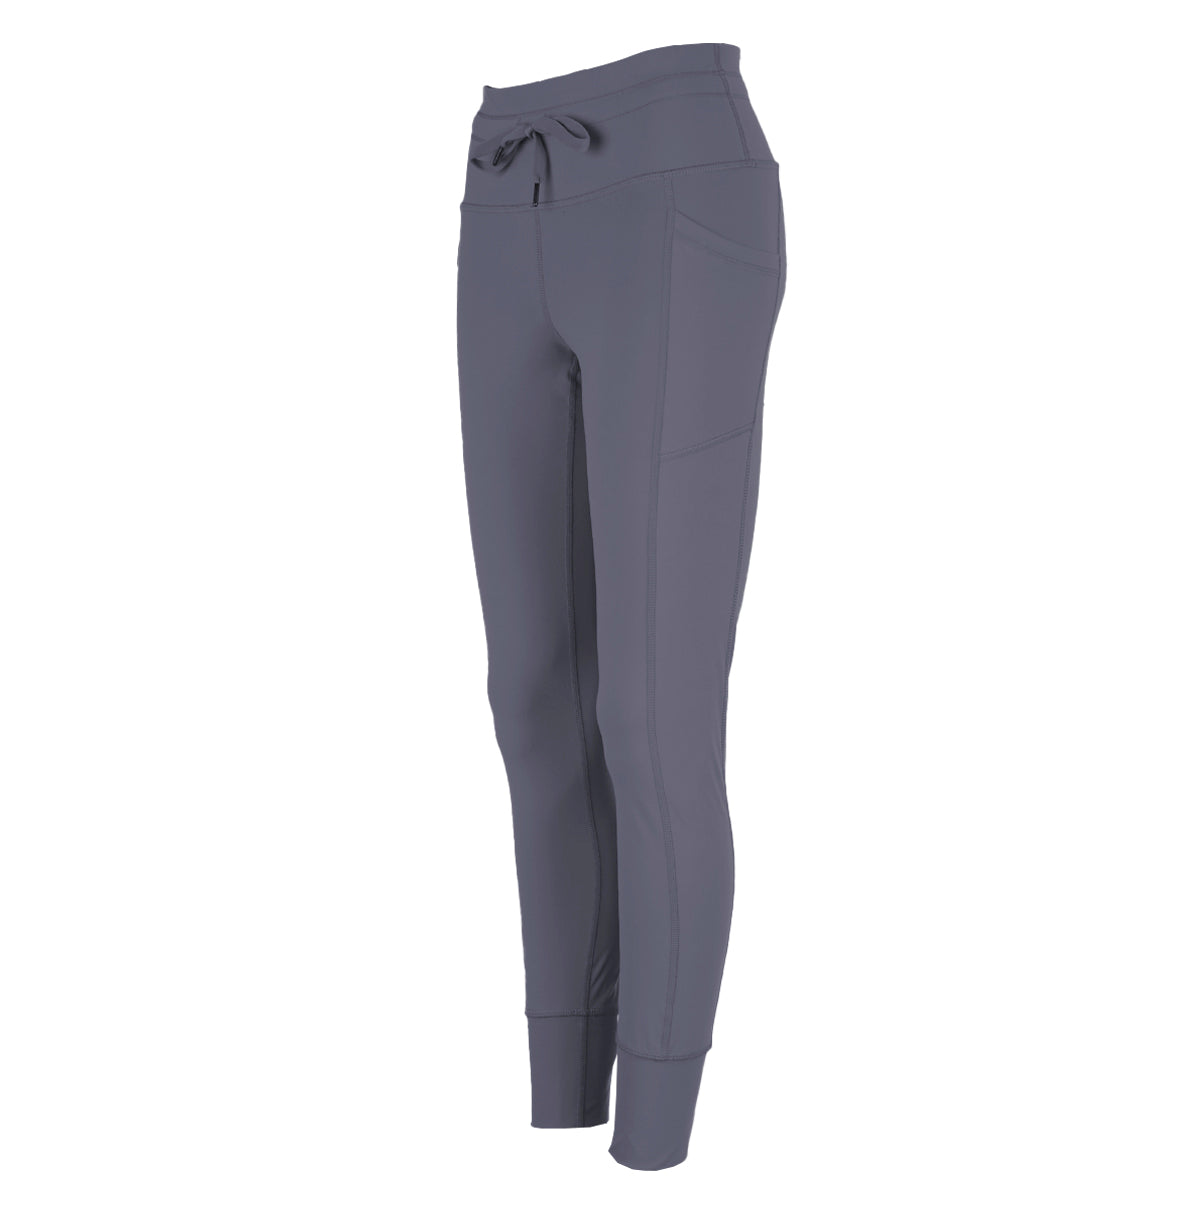 90 Degree By Reflex Carbon Interlink High Waist Cuffed Ankle Jogger -  Grisaille - X Small